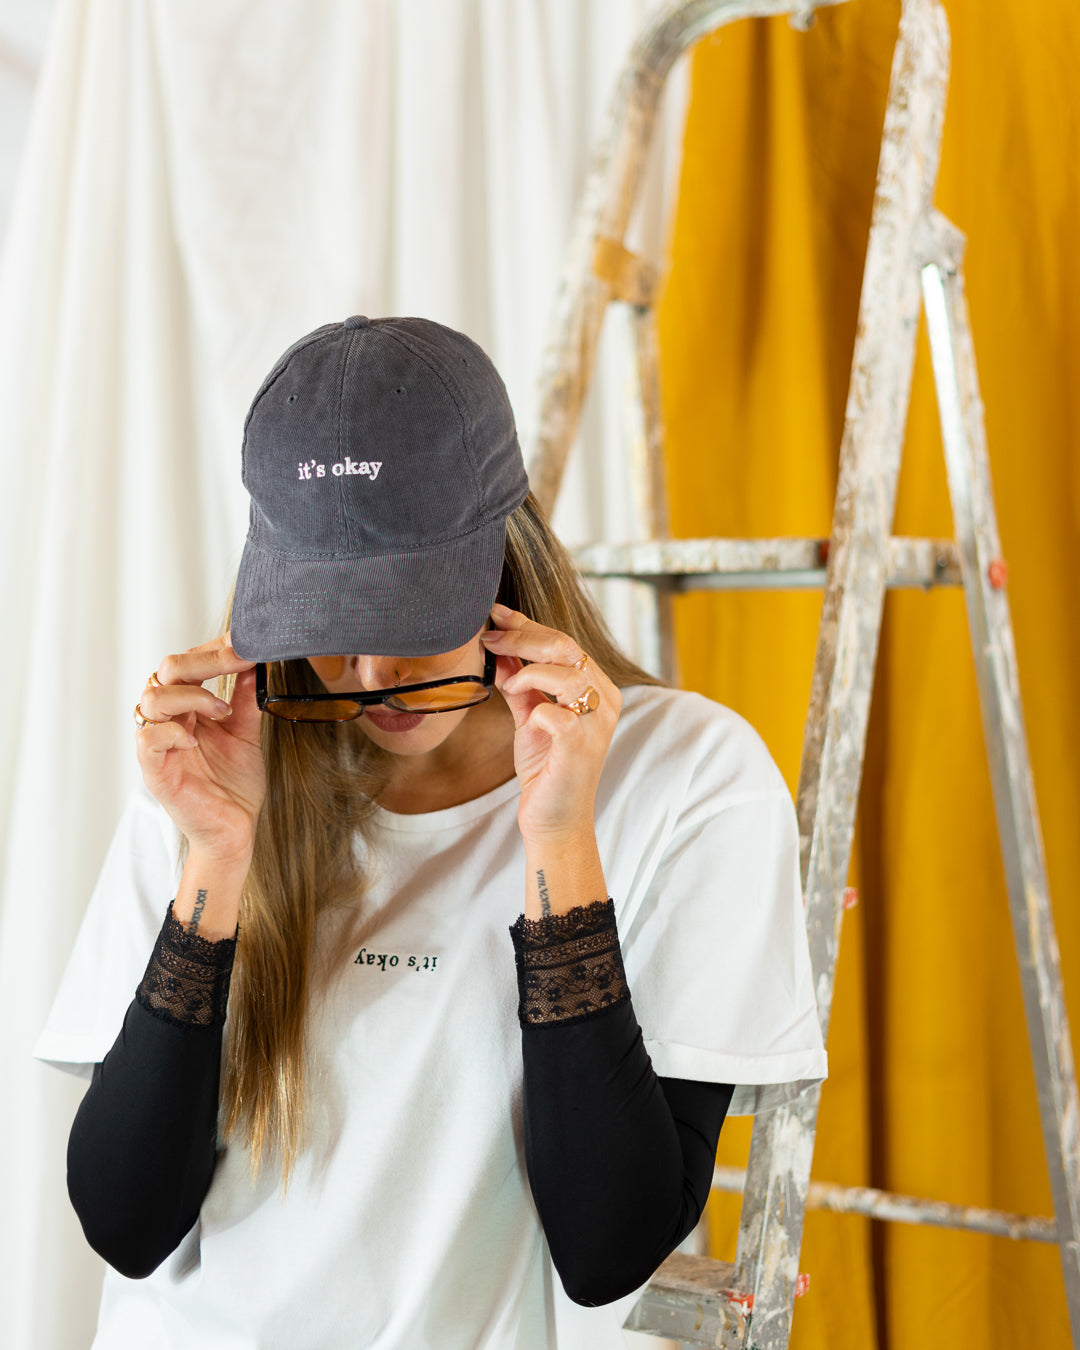 Storm cap | cotton needlecord corduroy in gray. Embroidered in Portugal. One size fits most | Wear it with pride. It's okay to be exactly who you are. Pt: Boné algodão de pala em bombazine de cor cinza, tamanha ajustável.  Image: girl with word search organic t-shirts from it's okay, taking of her sunglasses wearing a storm cap. In her back, a construction ladder.